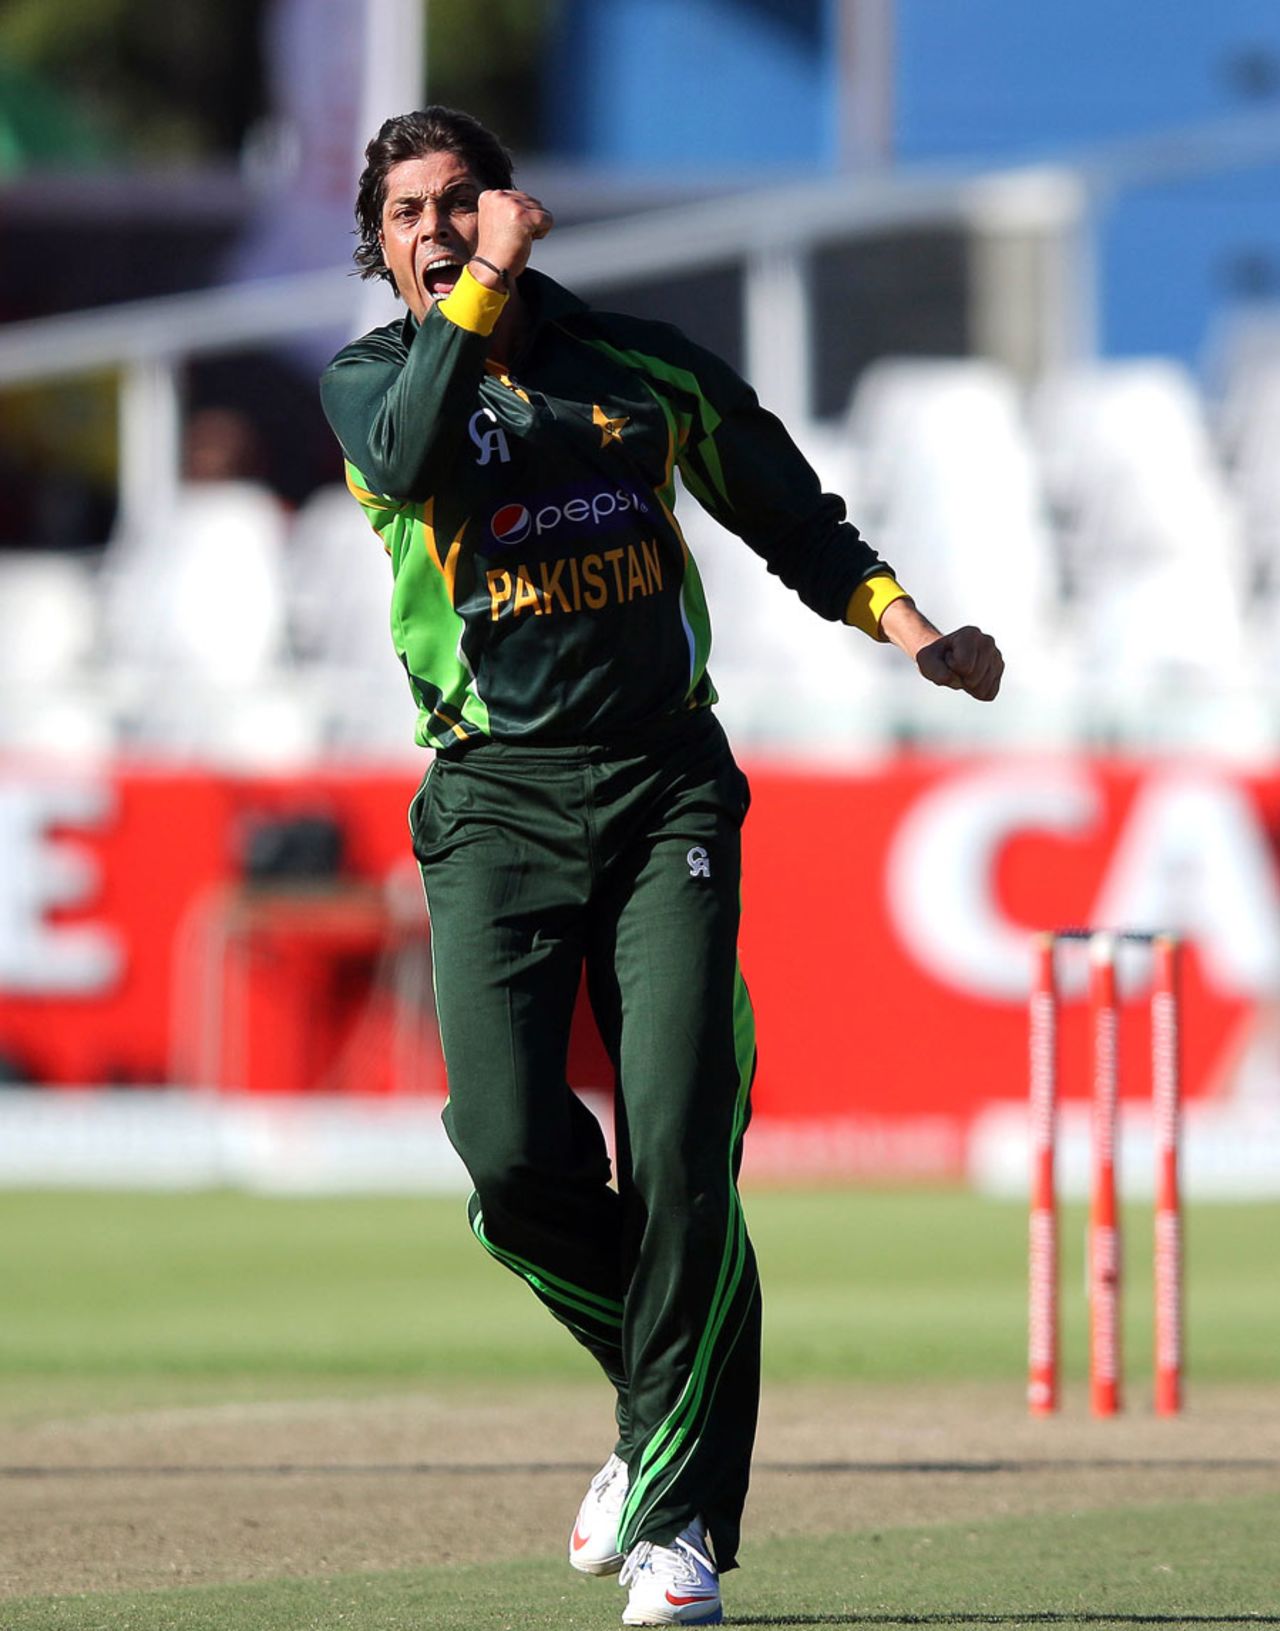 Anwar Ali picked up two wickets on his ODI debut, South Africa v Pakistan, 1st ODI, Cape Town, November 24, 2013